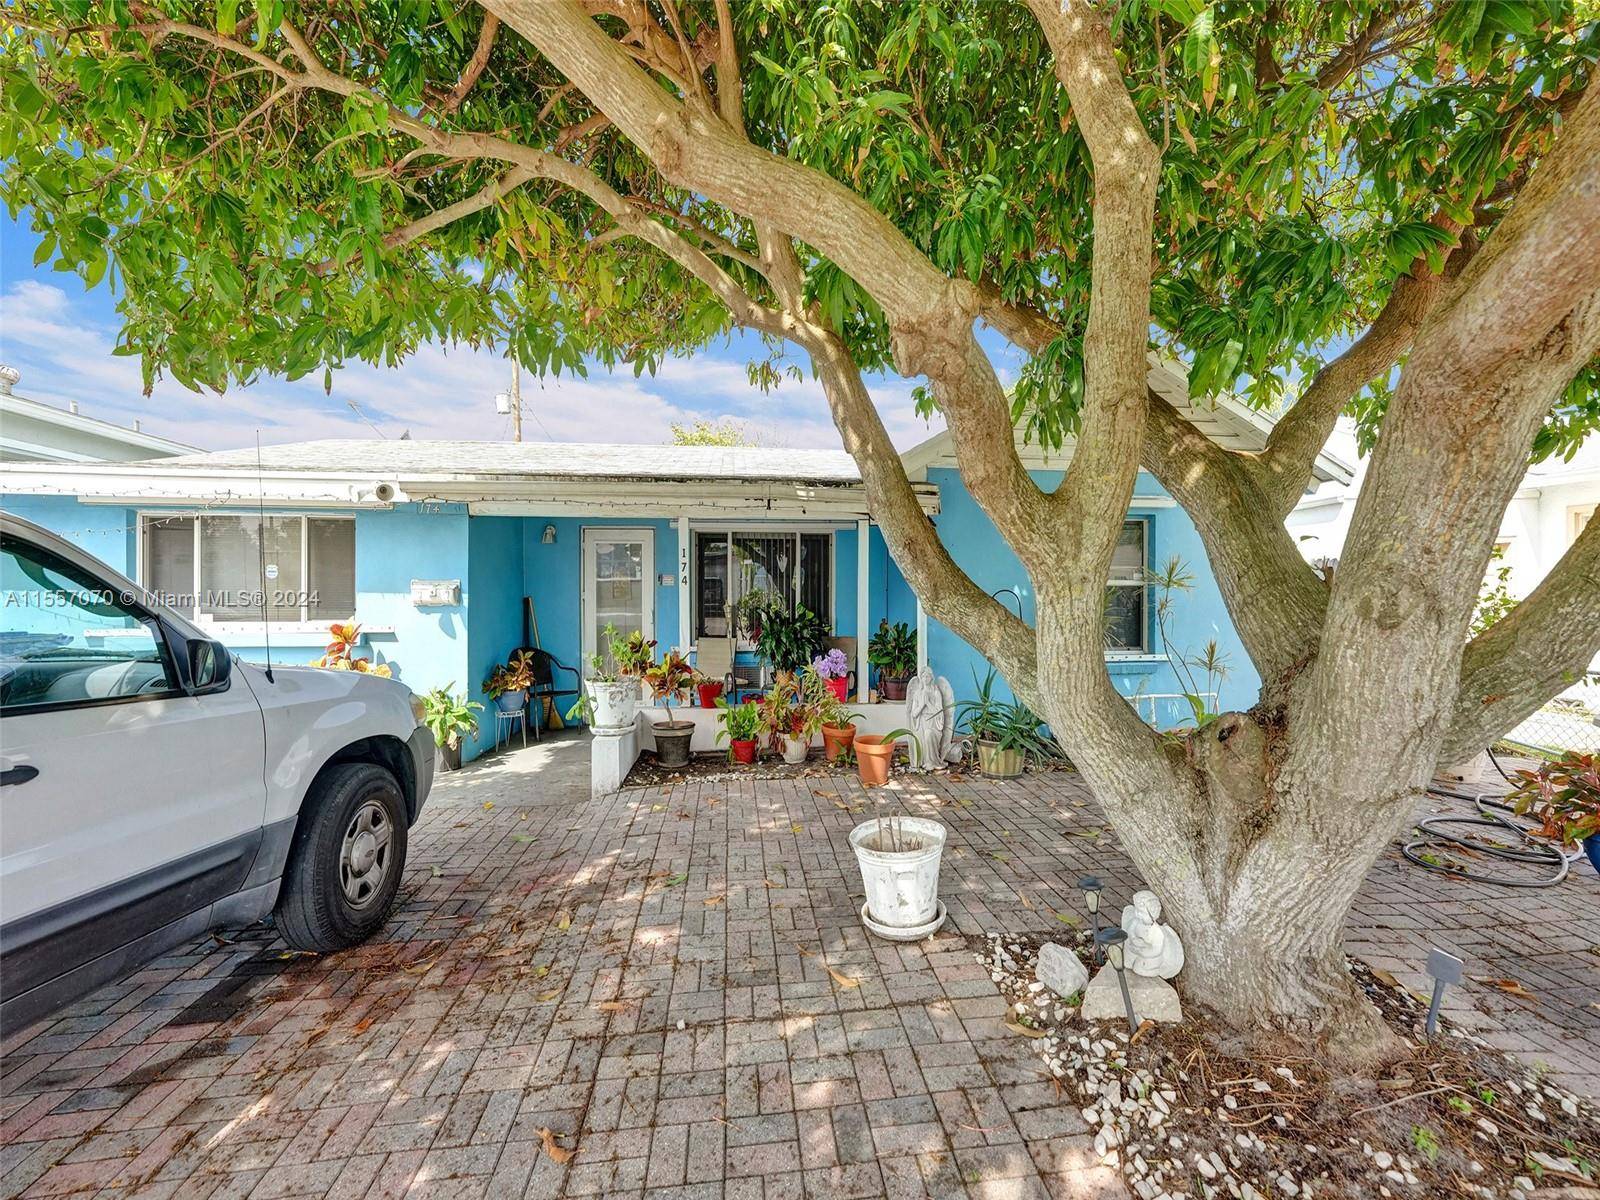 Welcome to 174 E 23rd St, a hidden gem in Rivera Beach with tranquil marina views.